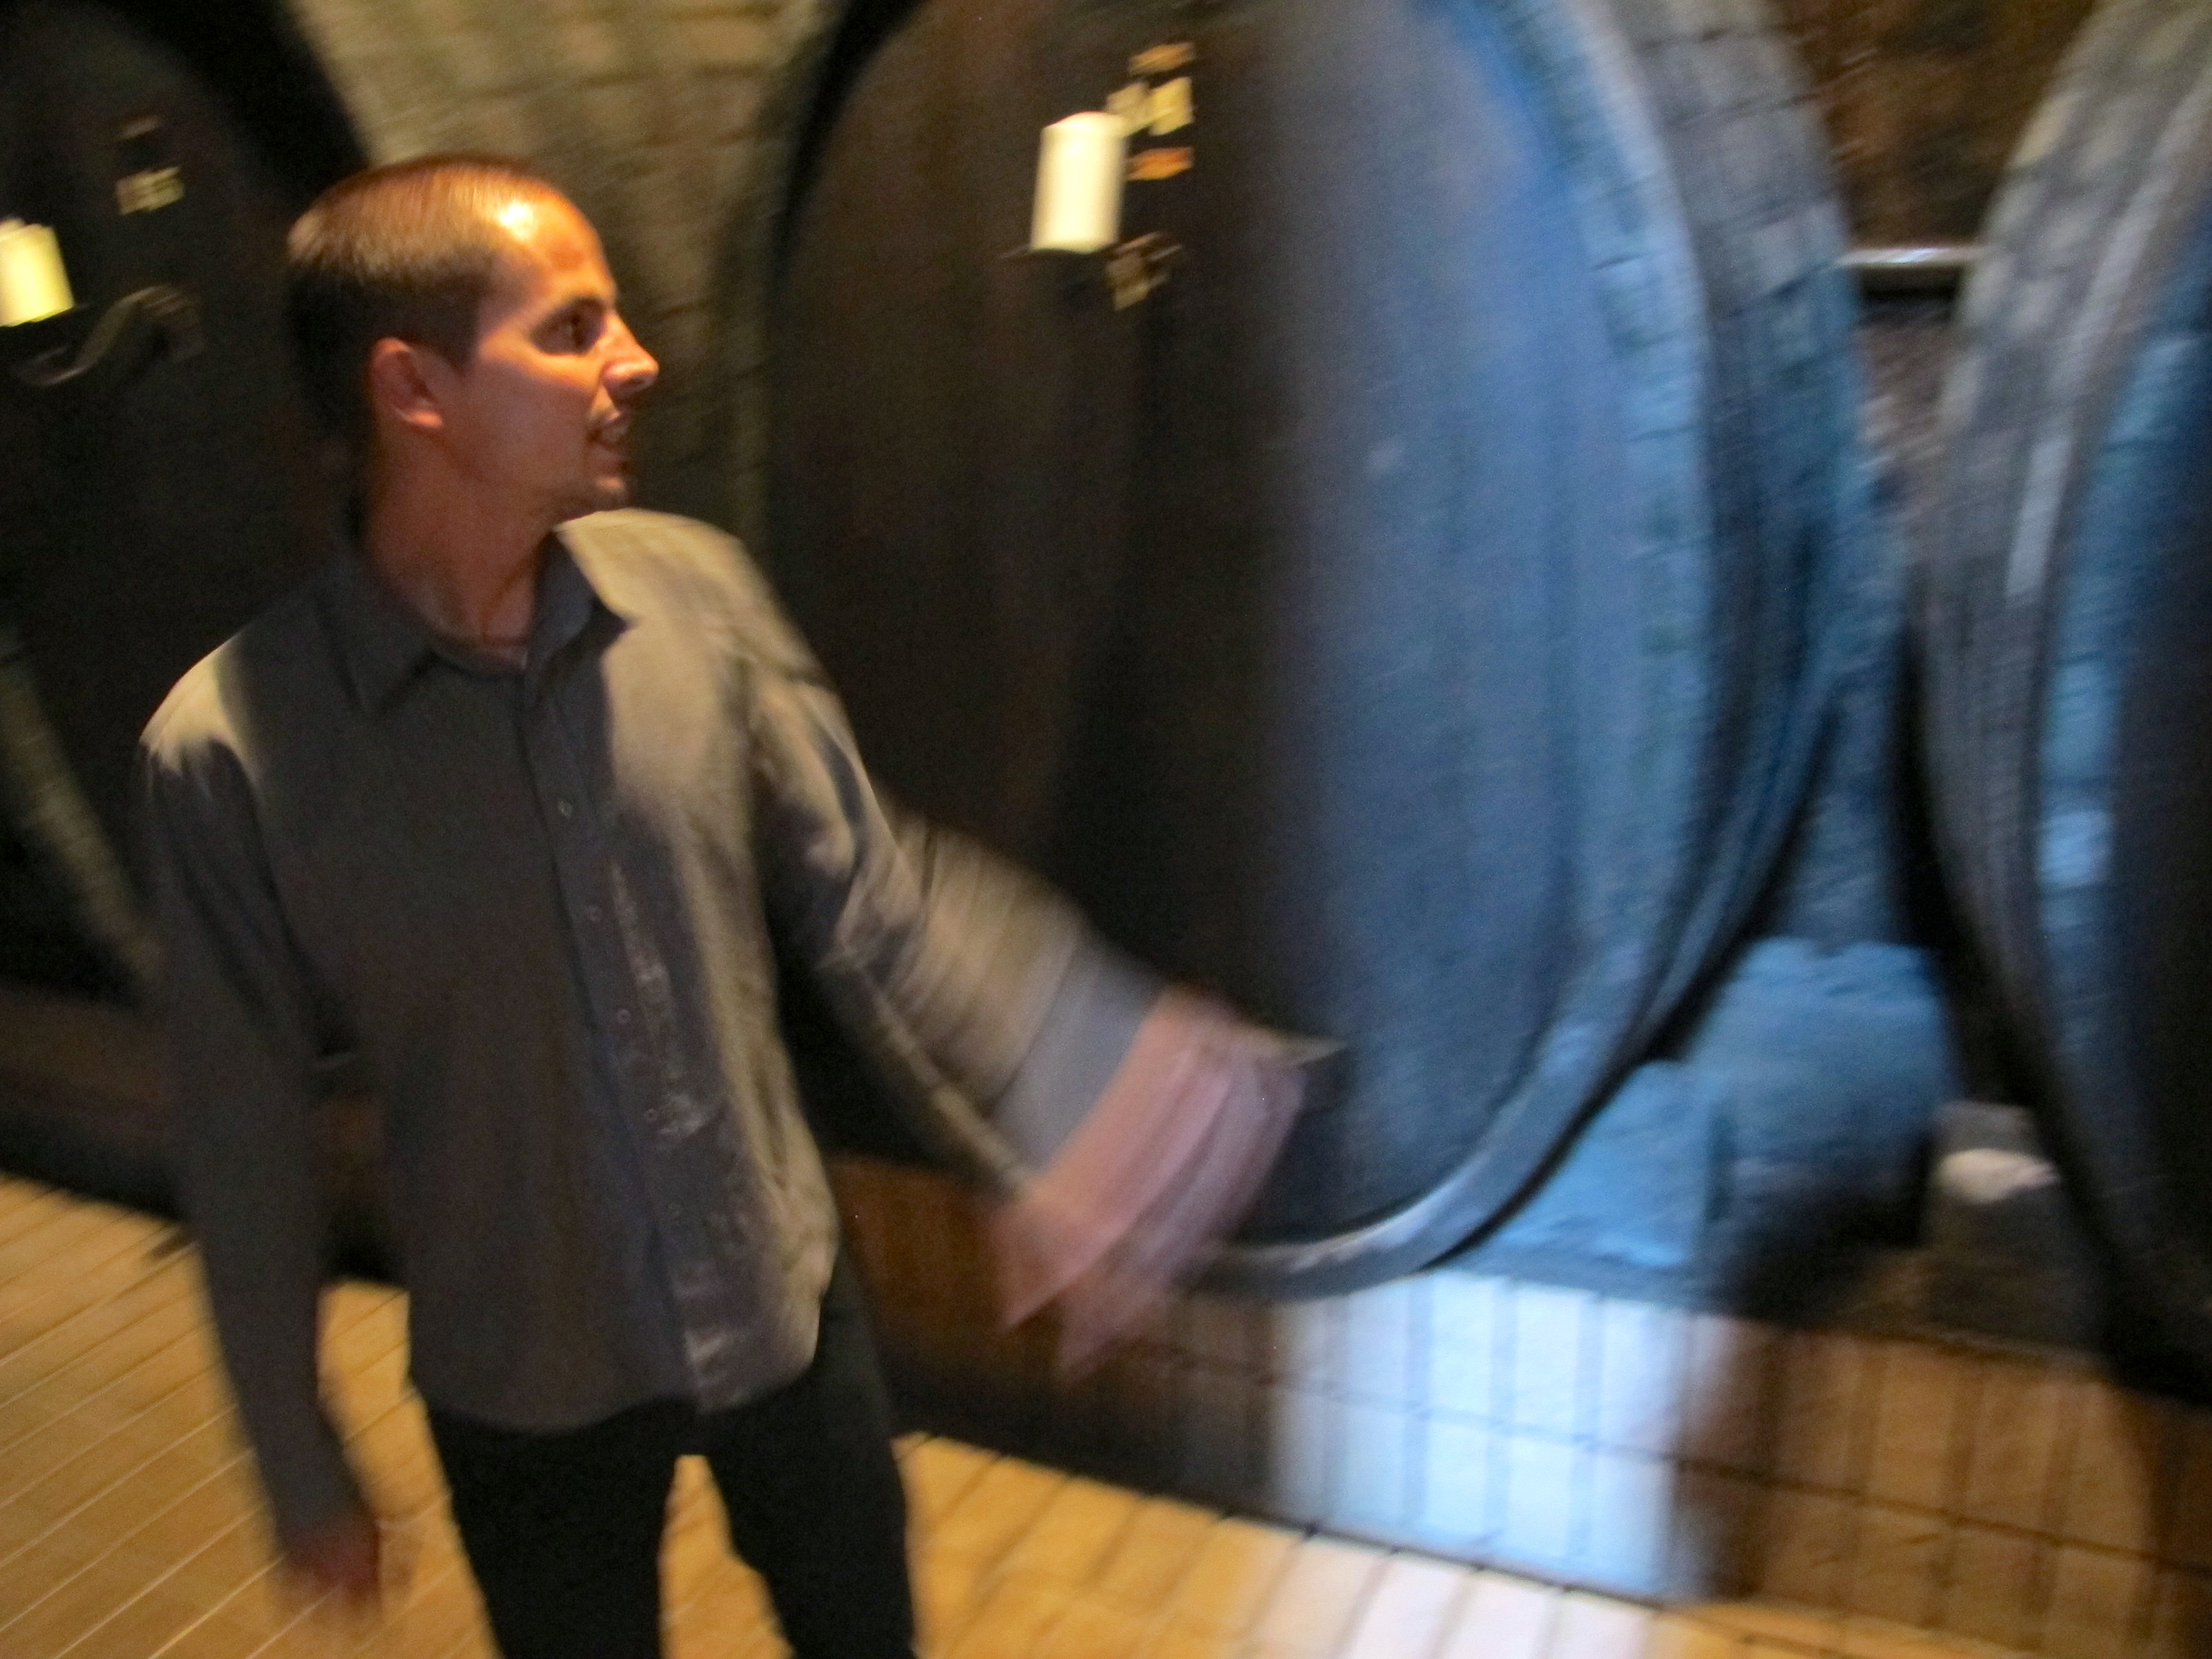 At Vinag, the largest wine cellar in Europe - over 2.5 kilometers or 1.5 miles long.